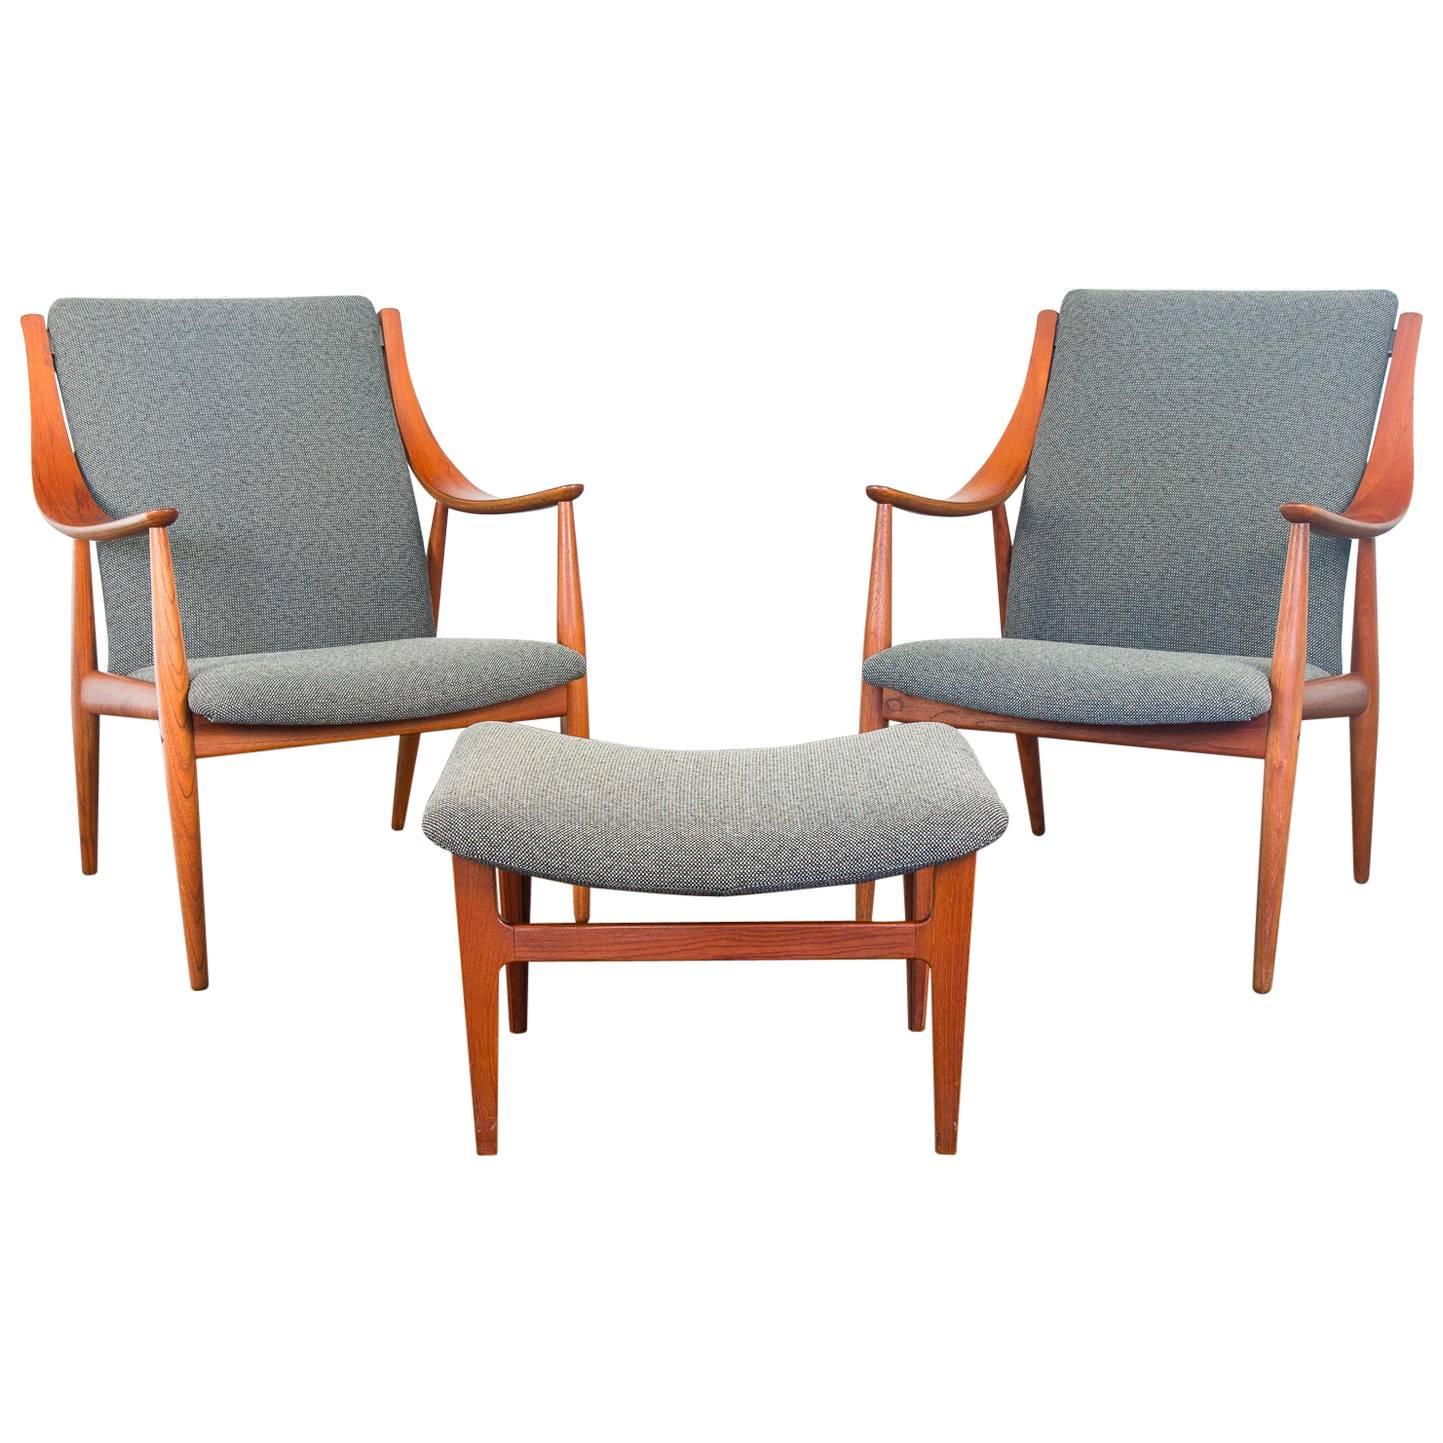 Peter Hvidt FD148 Easy Chairs and Ottoman set for France & Son distributed by Jon Stuart Inc. A brilliant pair of lounge chairs with curvilinear arms accompanied by an ottoman foot rest. The chairs and fixed cushion are faithfully upholstered with a